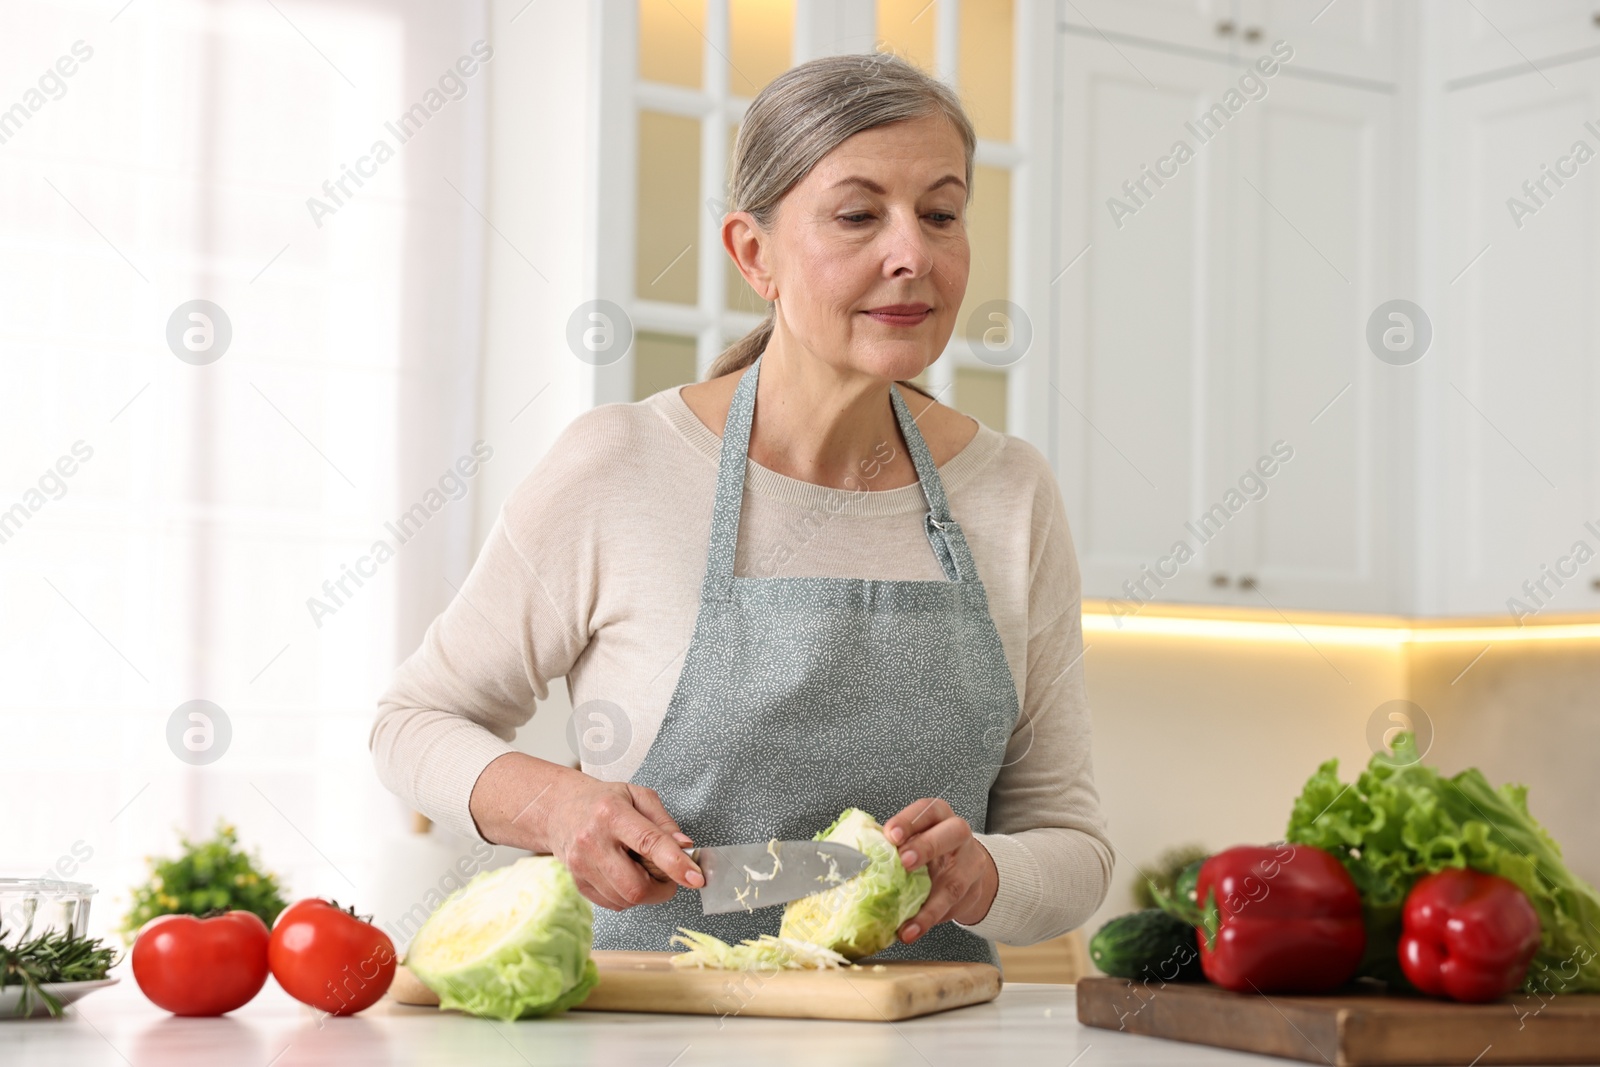 Photo of Happy housewife cutting cabbage at table in kitchen